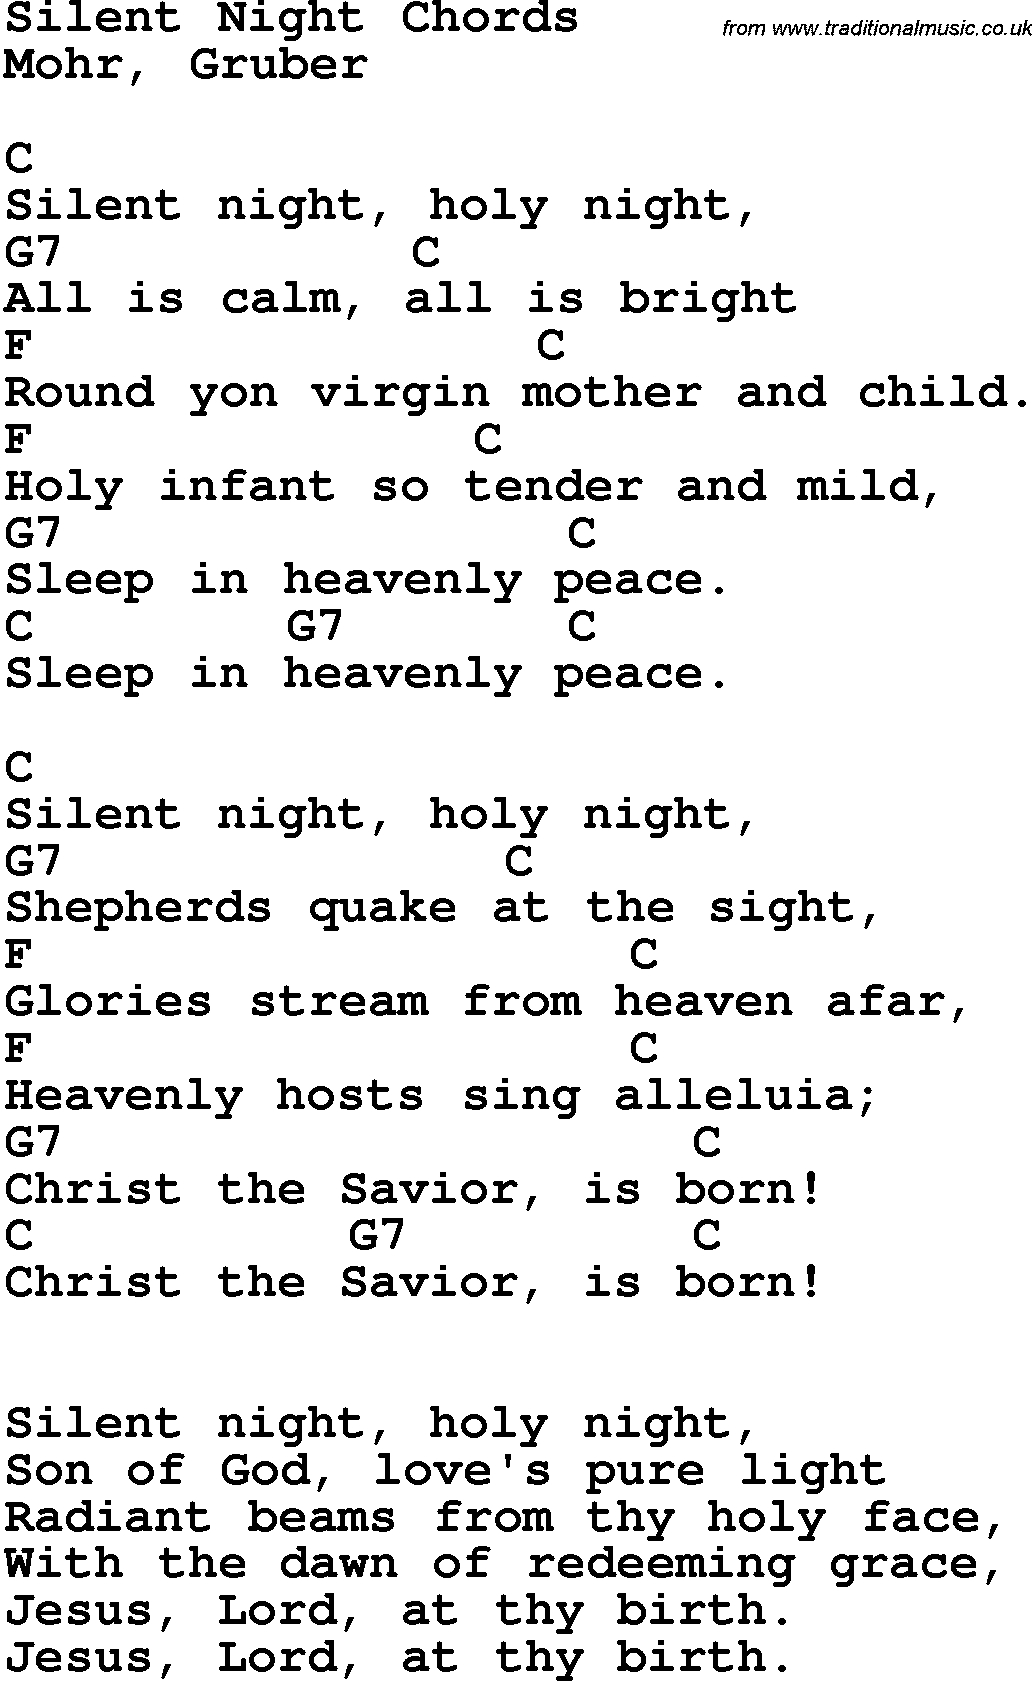 O Holy Night Chords Song Lyrics With Guitar Chords For Silent Night